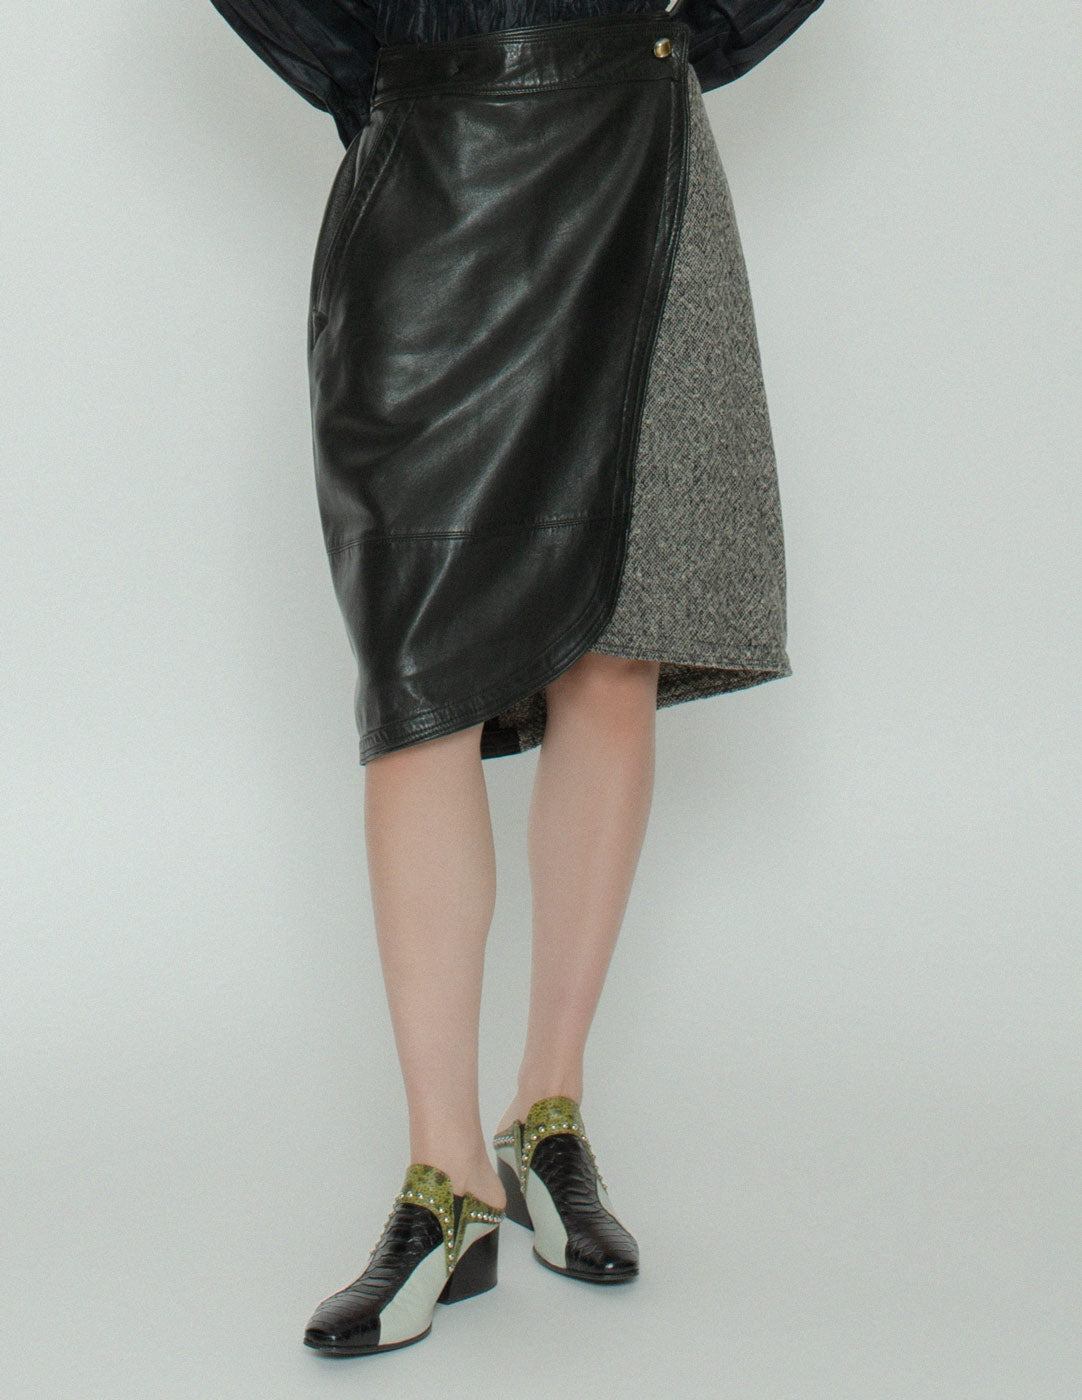 Gianni Versace vintage leather and wool wrap skirt front detail